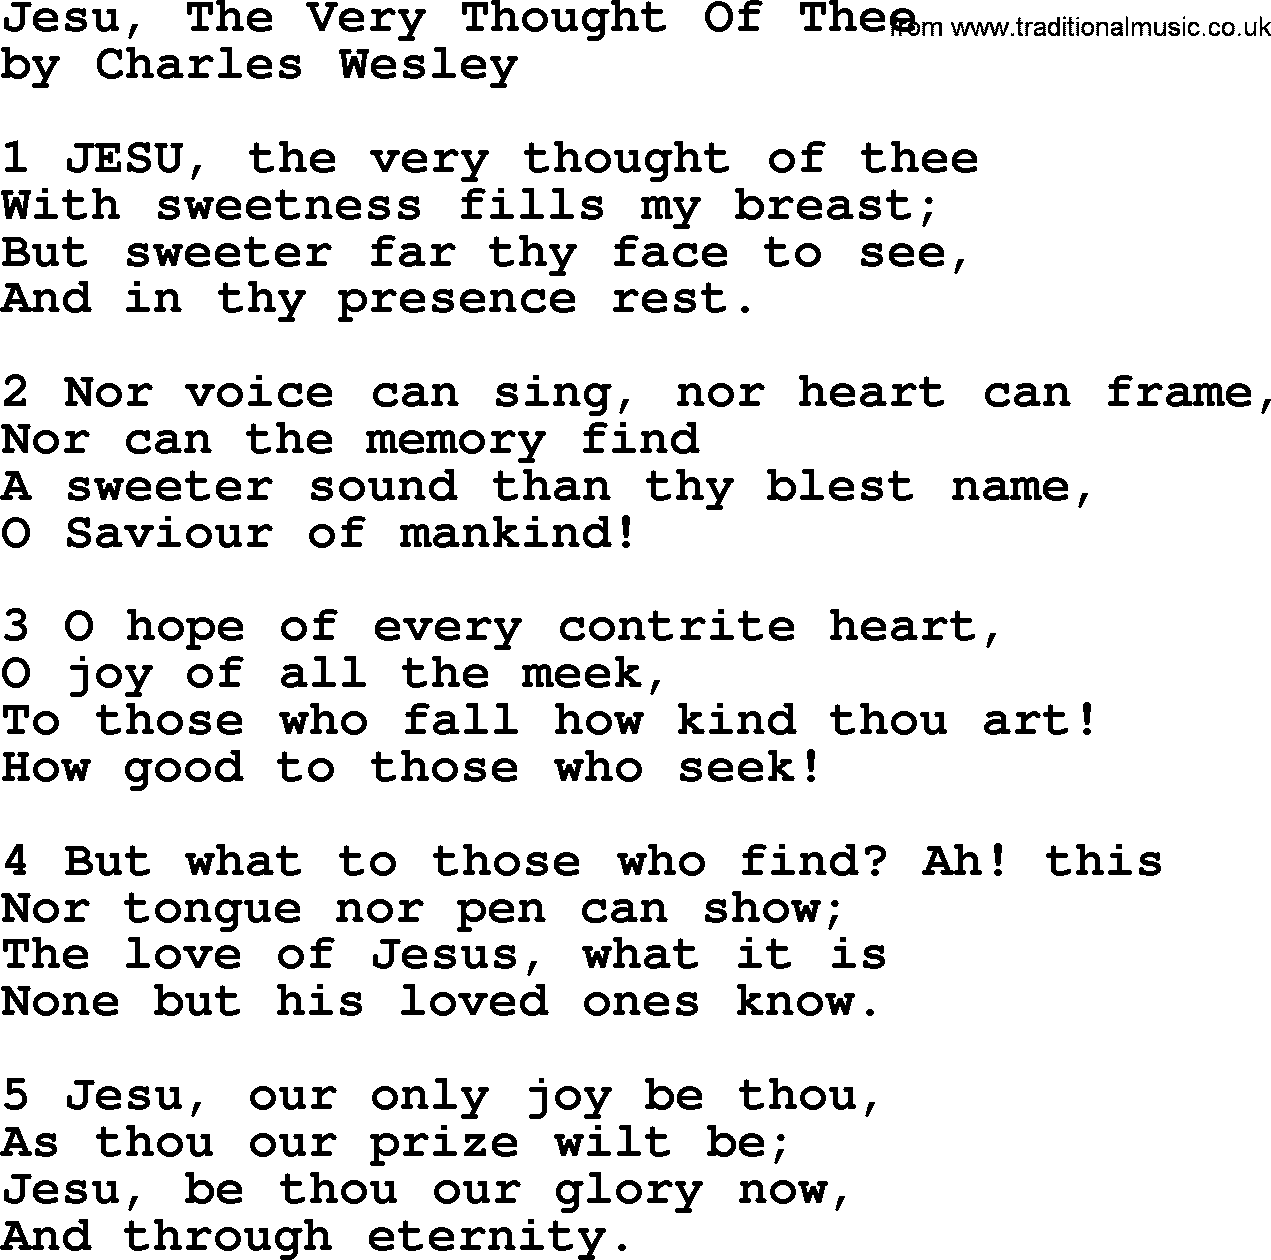 Charles Wesley hymn: Jesu, The Very Thought Of Thee, lyrics